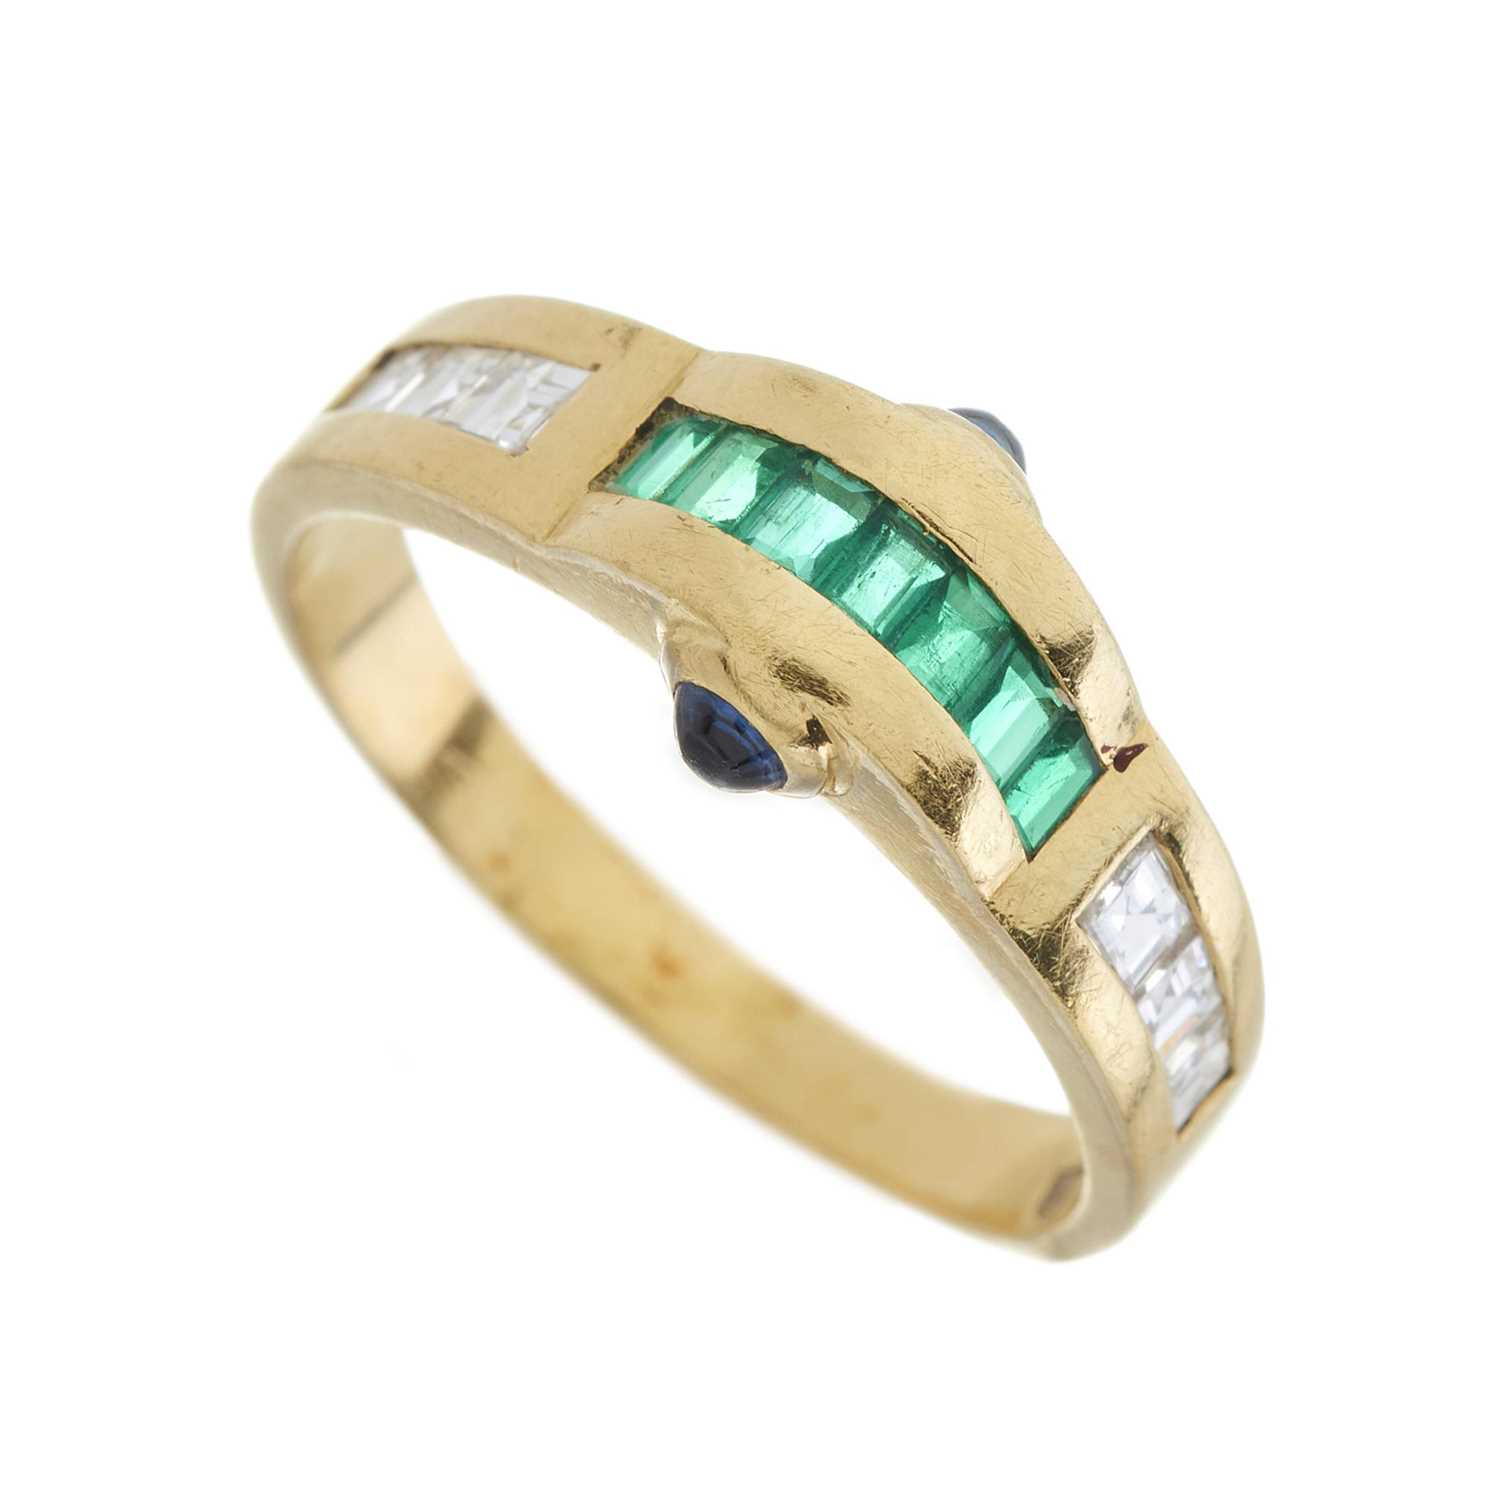 An 18ct gold emerald, diamond and sapphire dress ring - Image 3 of 3